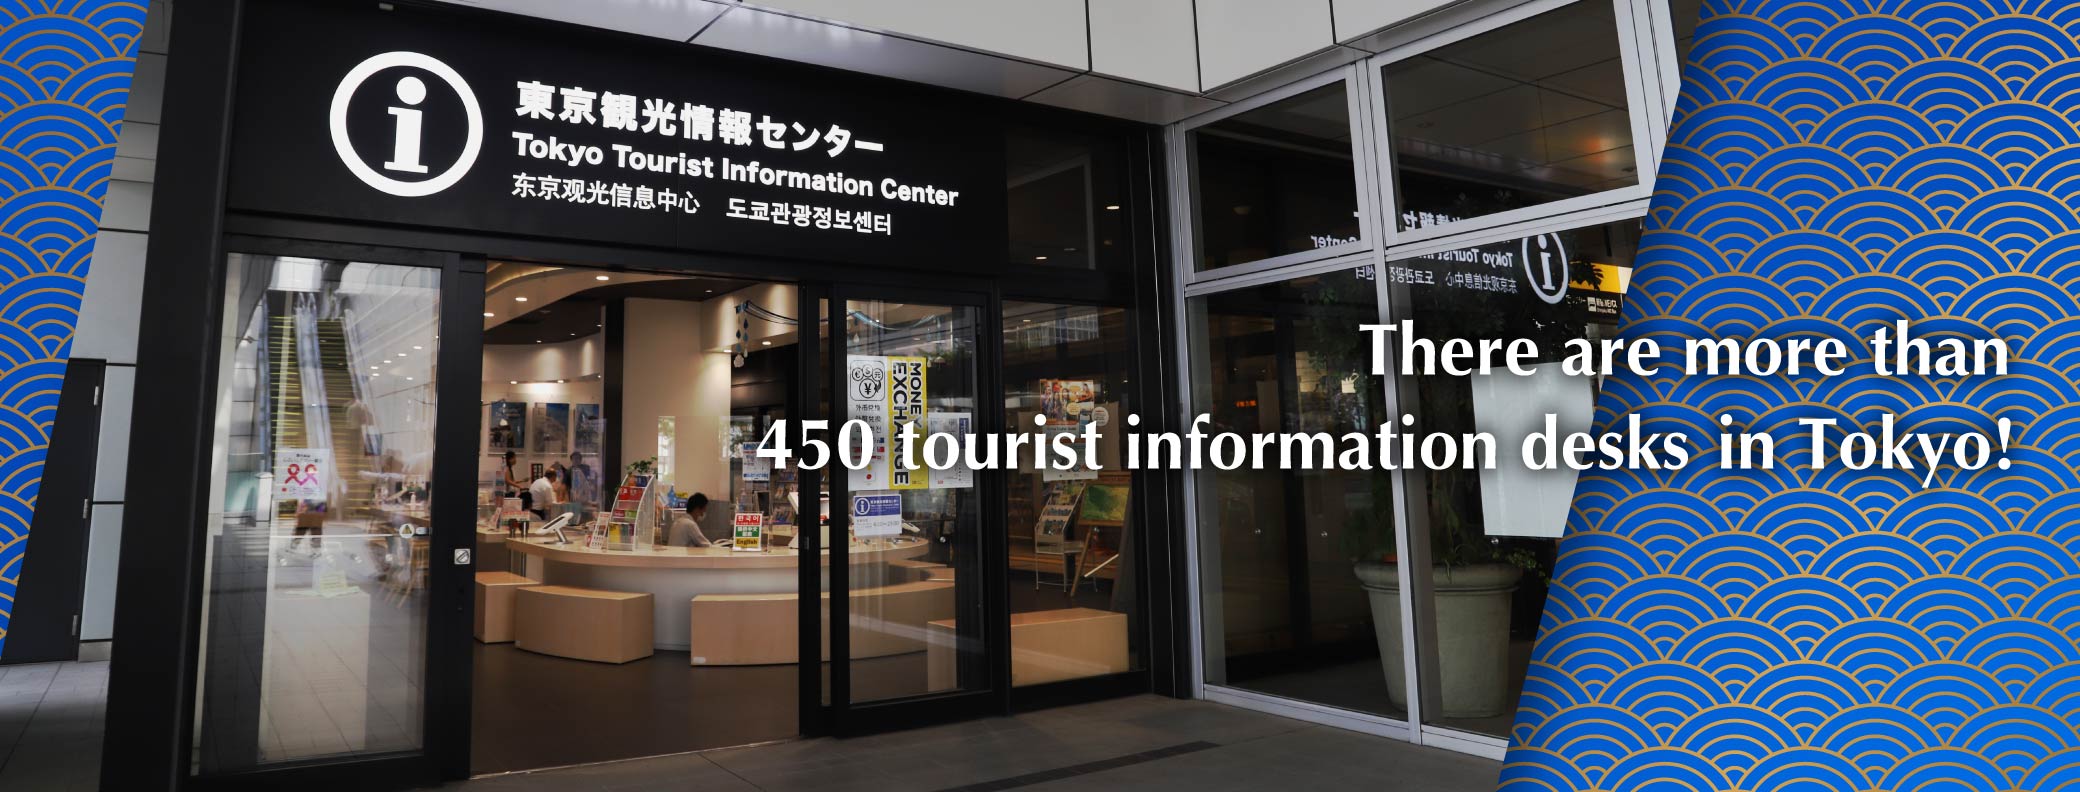 There are more than 470 tourist information desks in Tokyo!